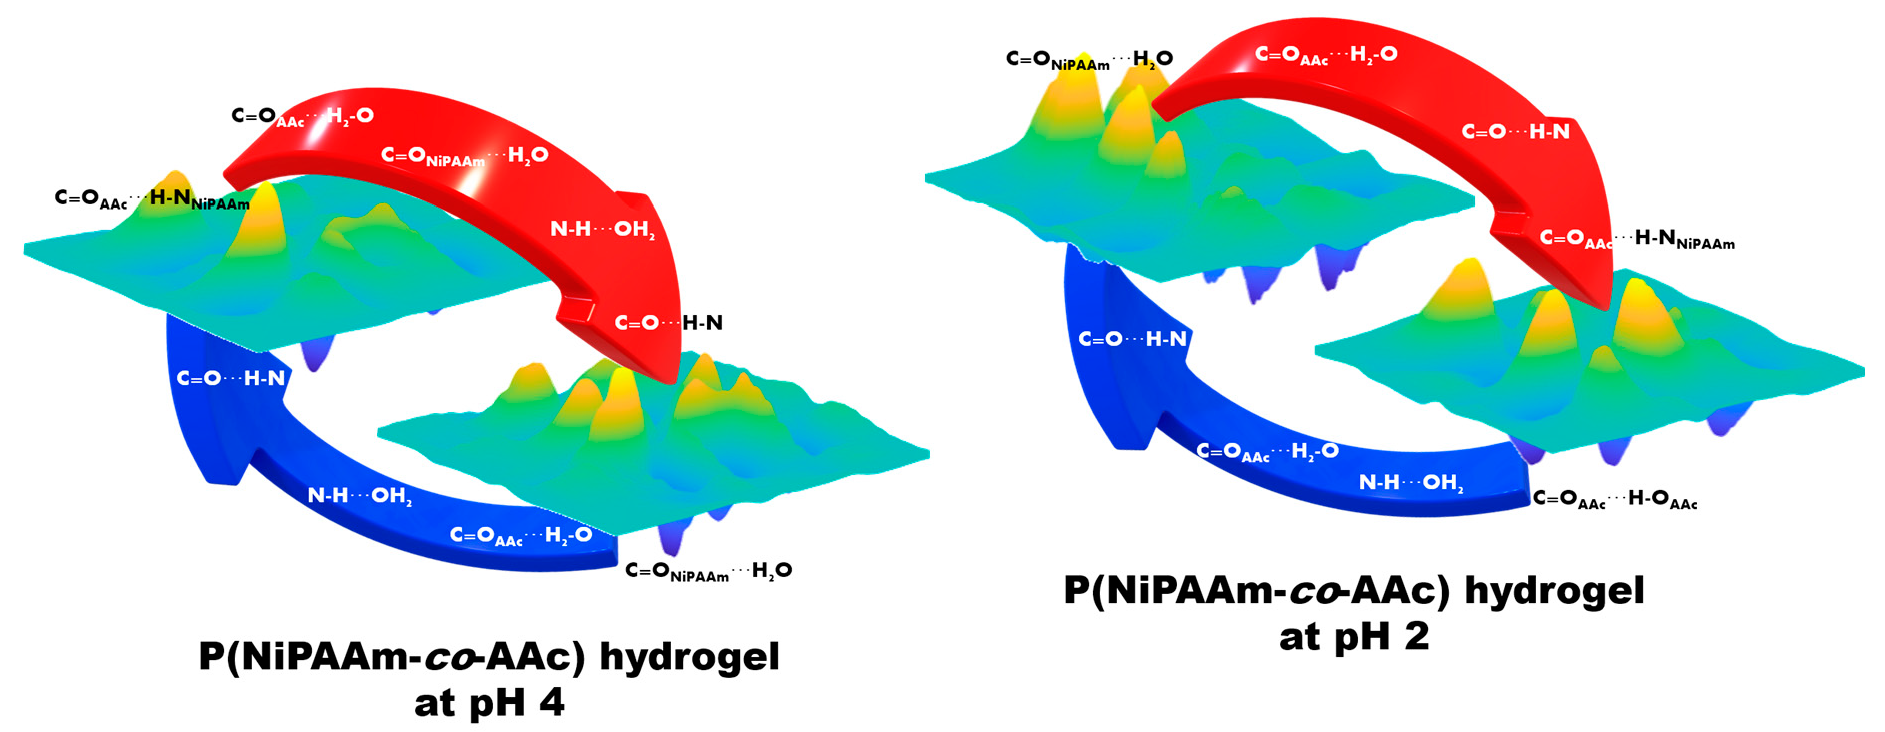 Polymers Free Full Text The Study Of Ph Effects On Phase Transition Of Multi Stimuli Responsive P Nipaam Co c Hydrogel Using 2d Cos Html